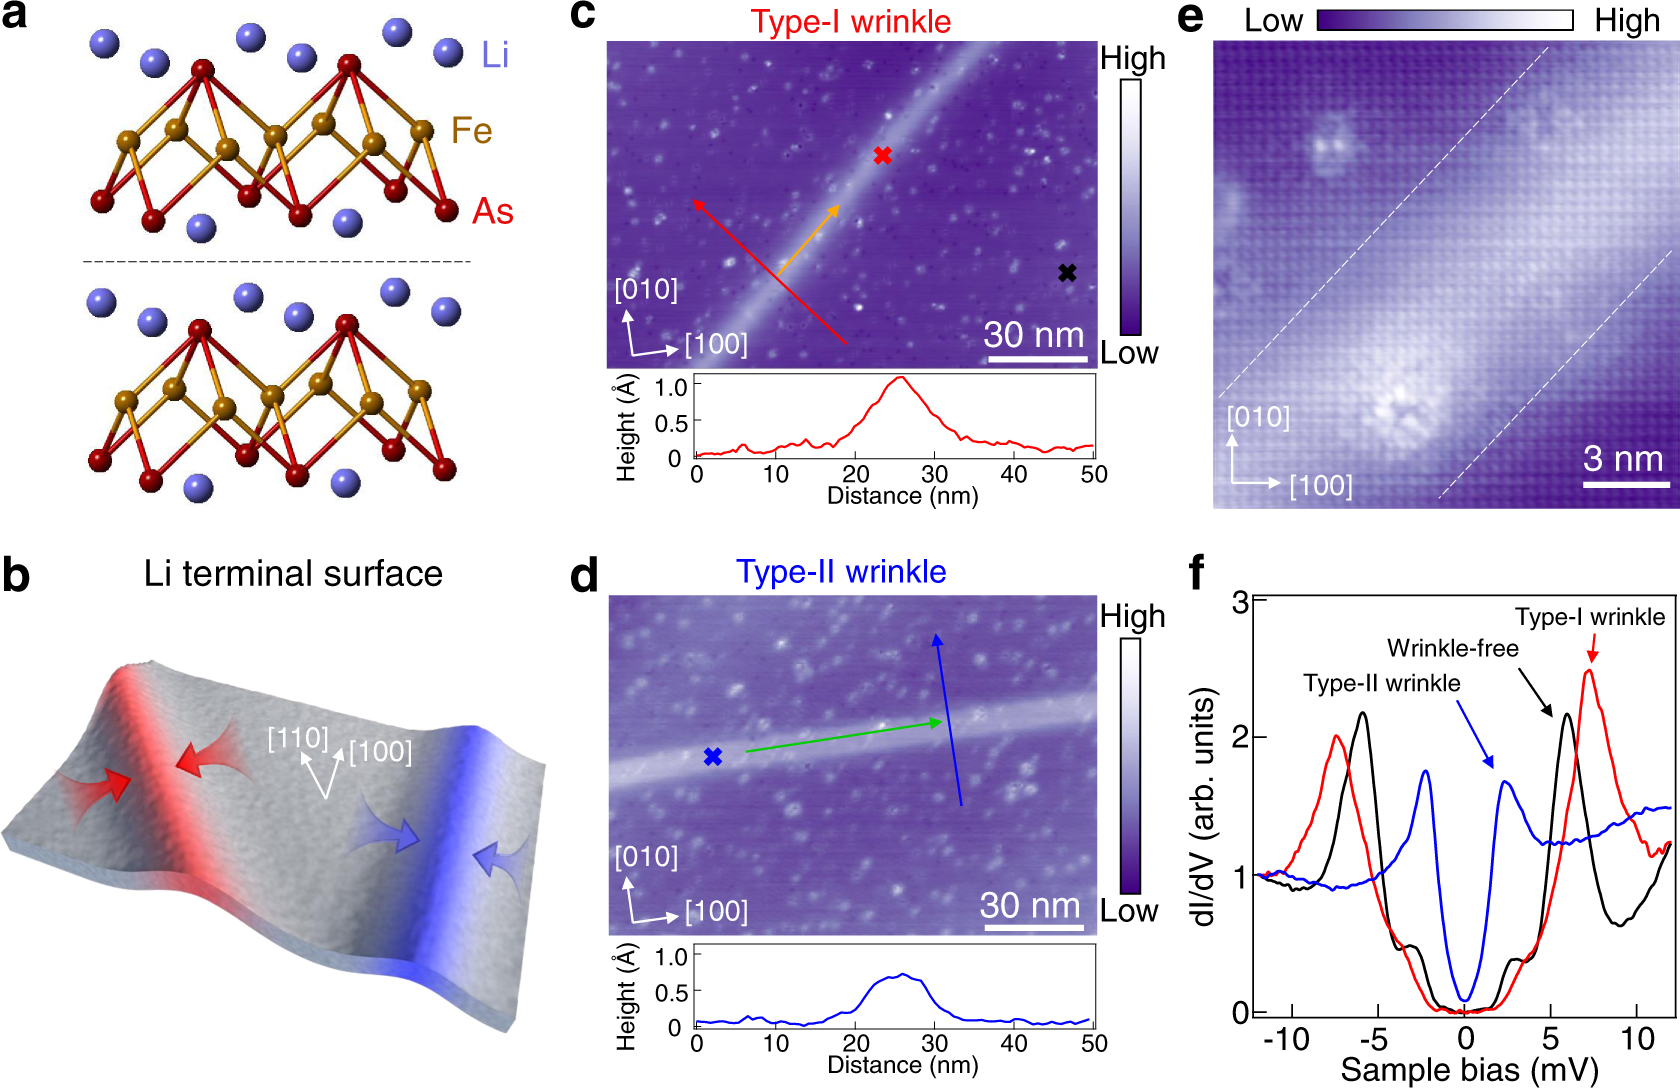 Two distinct superconducting states controlled by orientations of